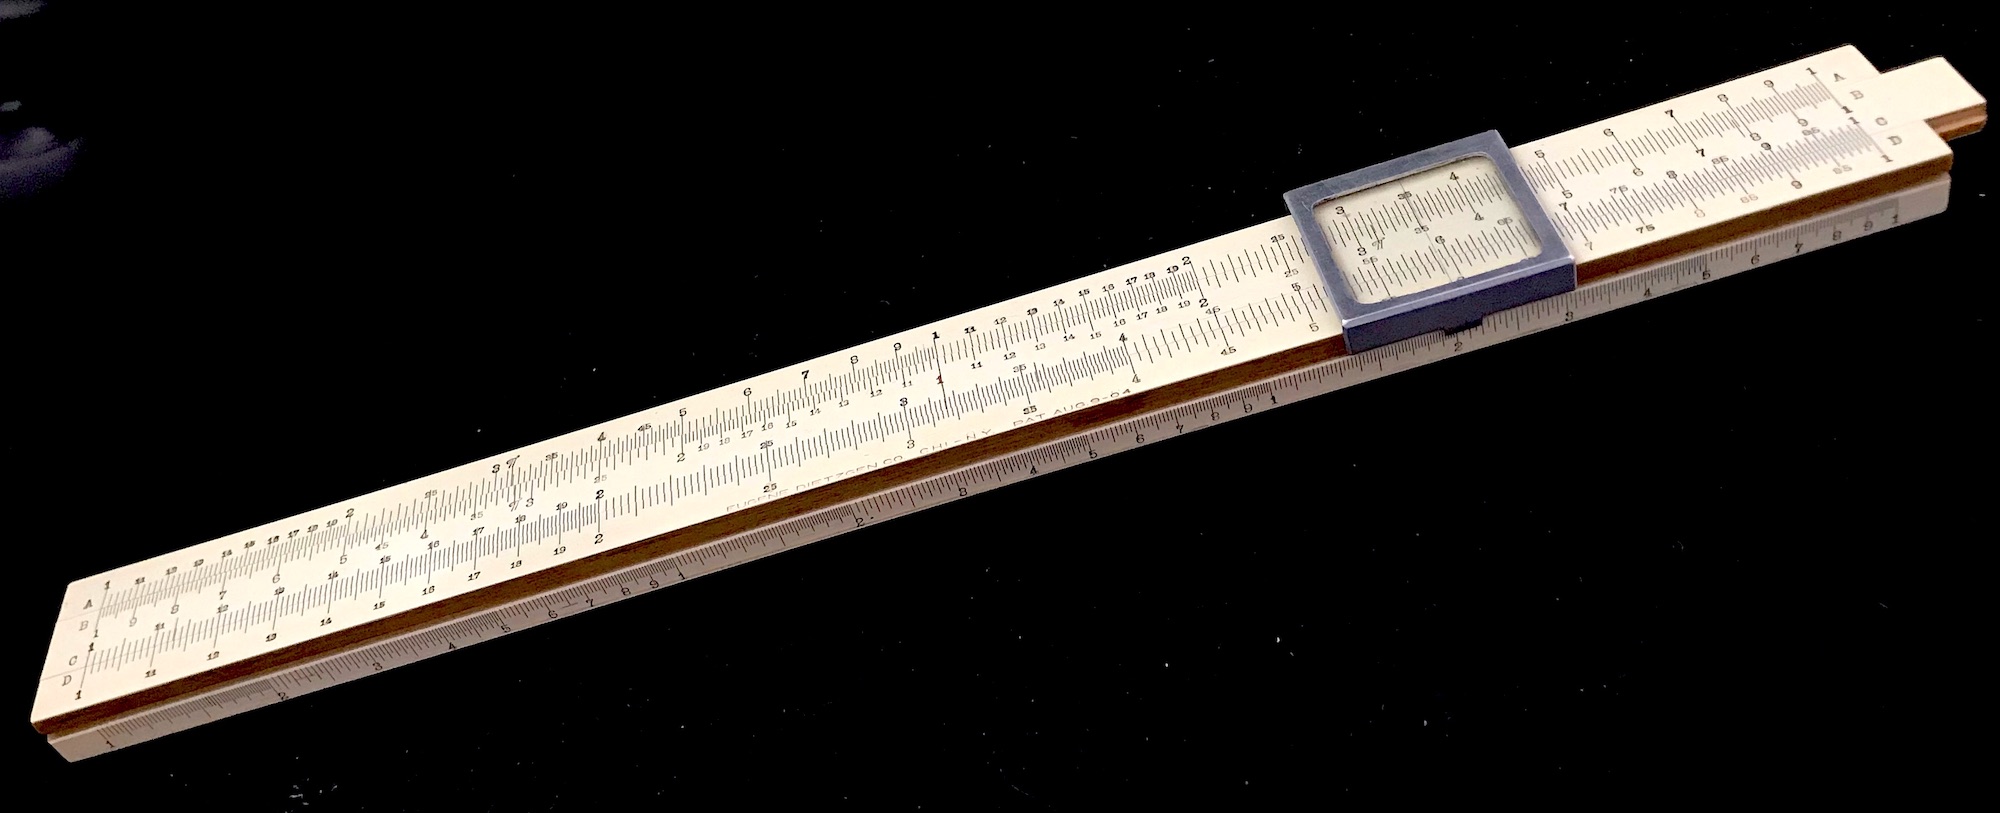 The Dietzgen 1762 with E scale on lower edge.